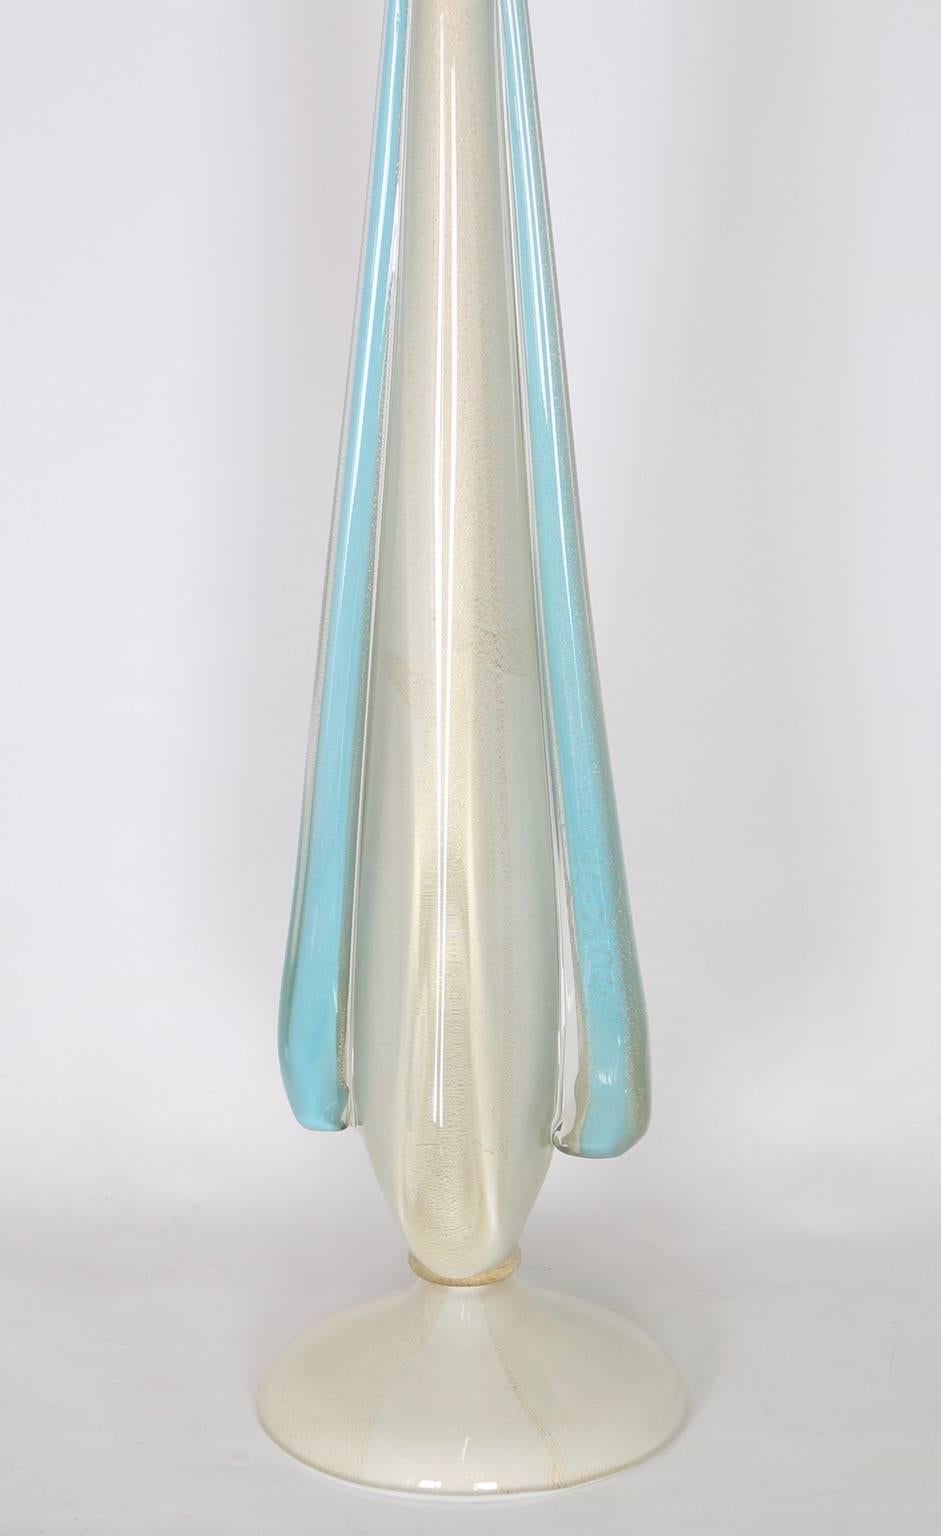 Italian Flavio Poli for Seguso Sommerso Lamp in Blue and White with Gold Aventurine